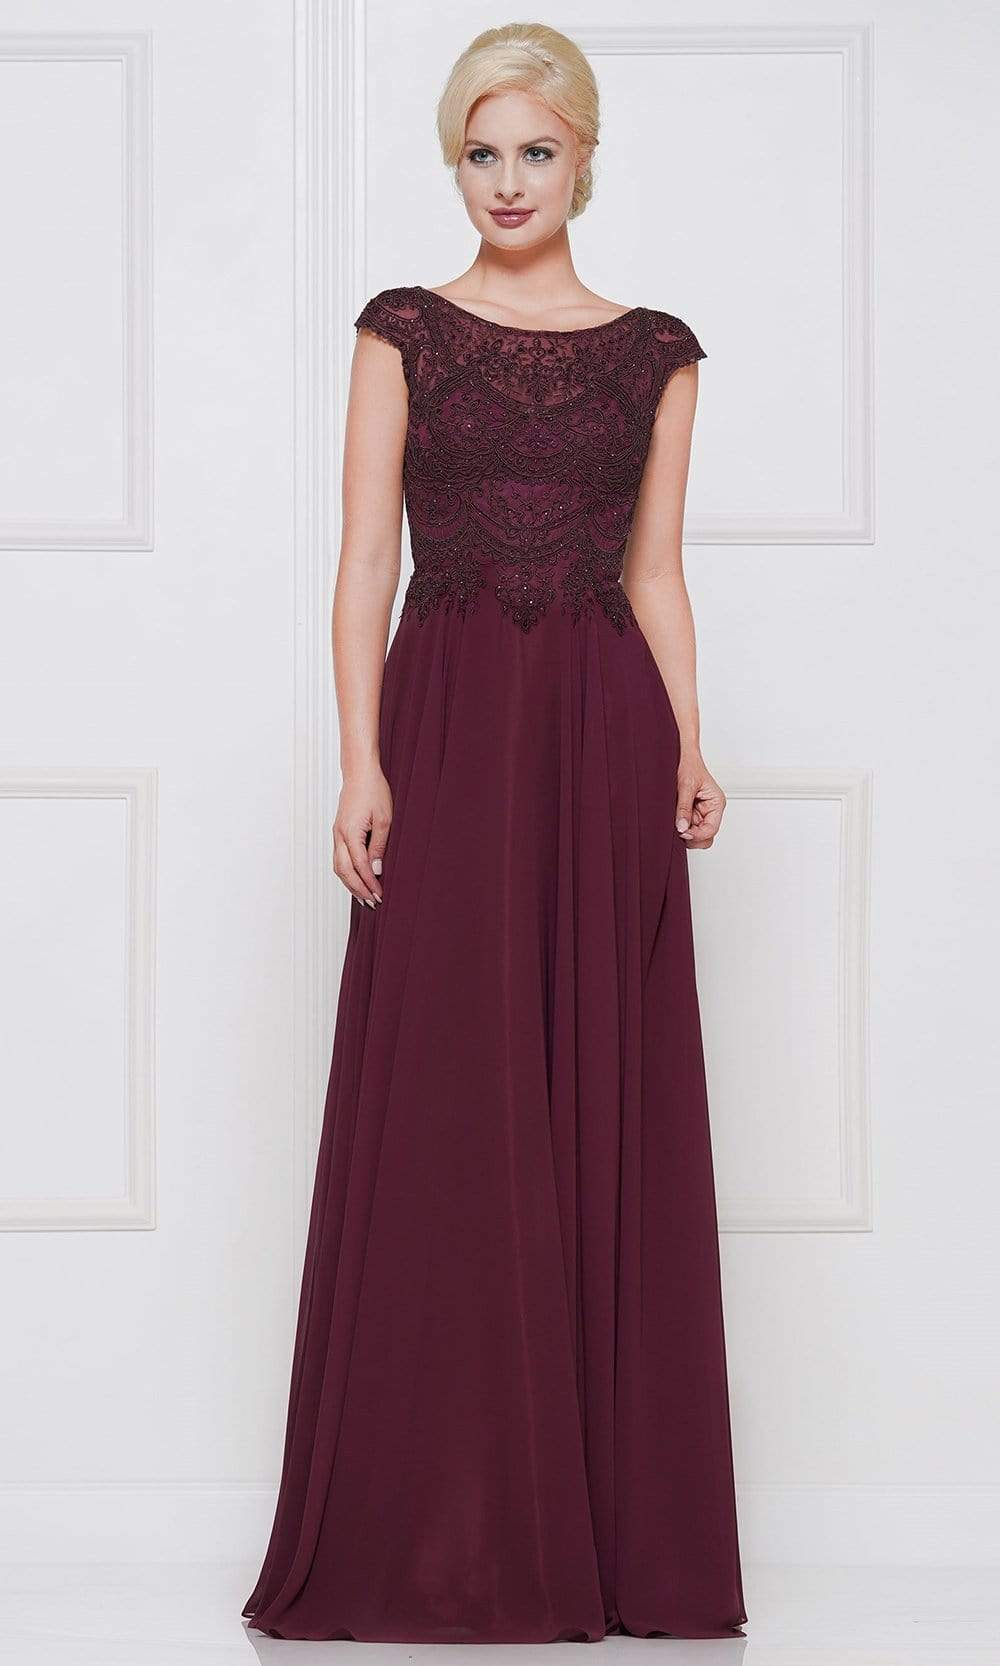 Marsoni by Colors - M238 Beaded Applique A Line Chiffon Dress Special Occasion Dress 4 / Wine